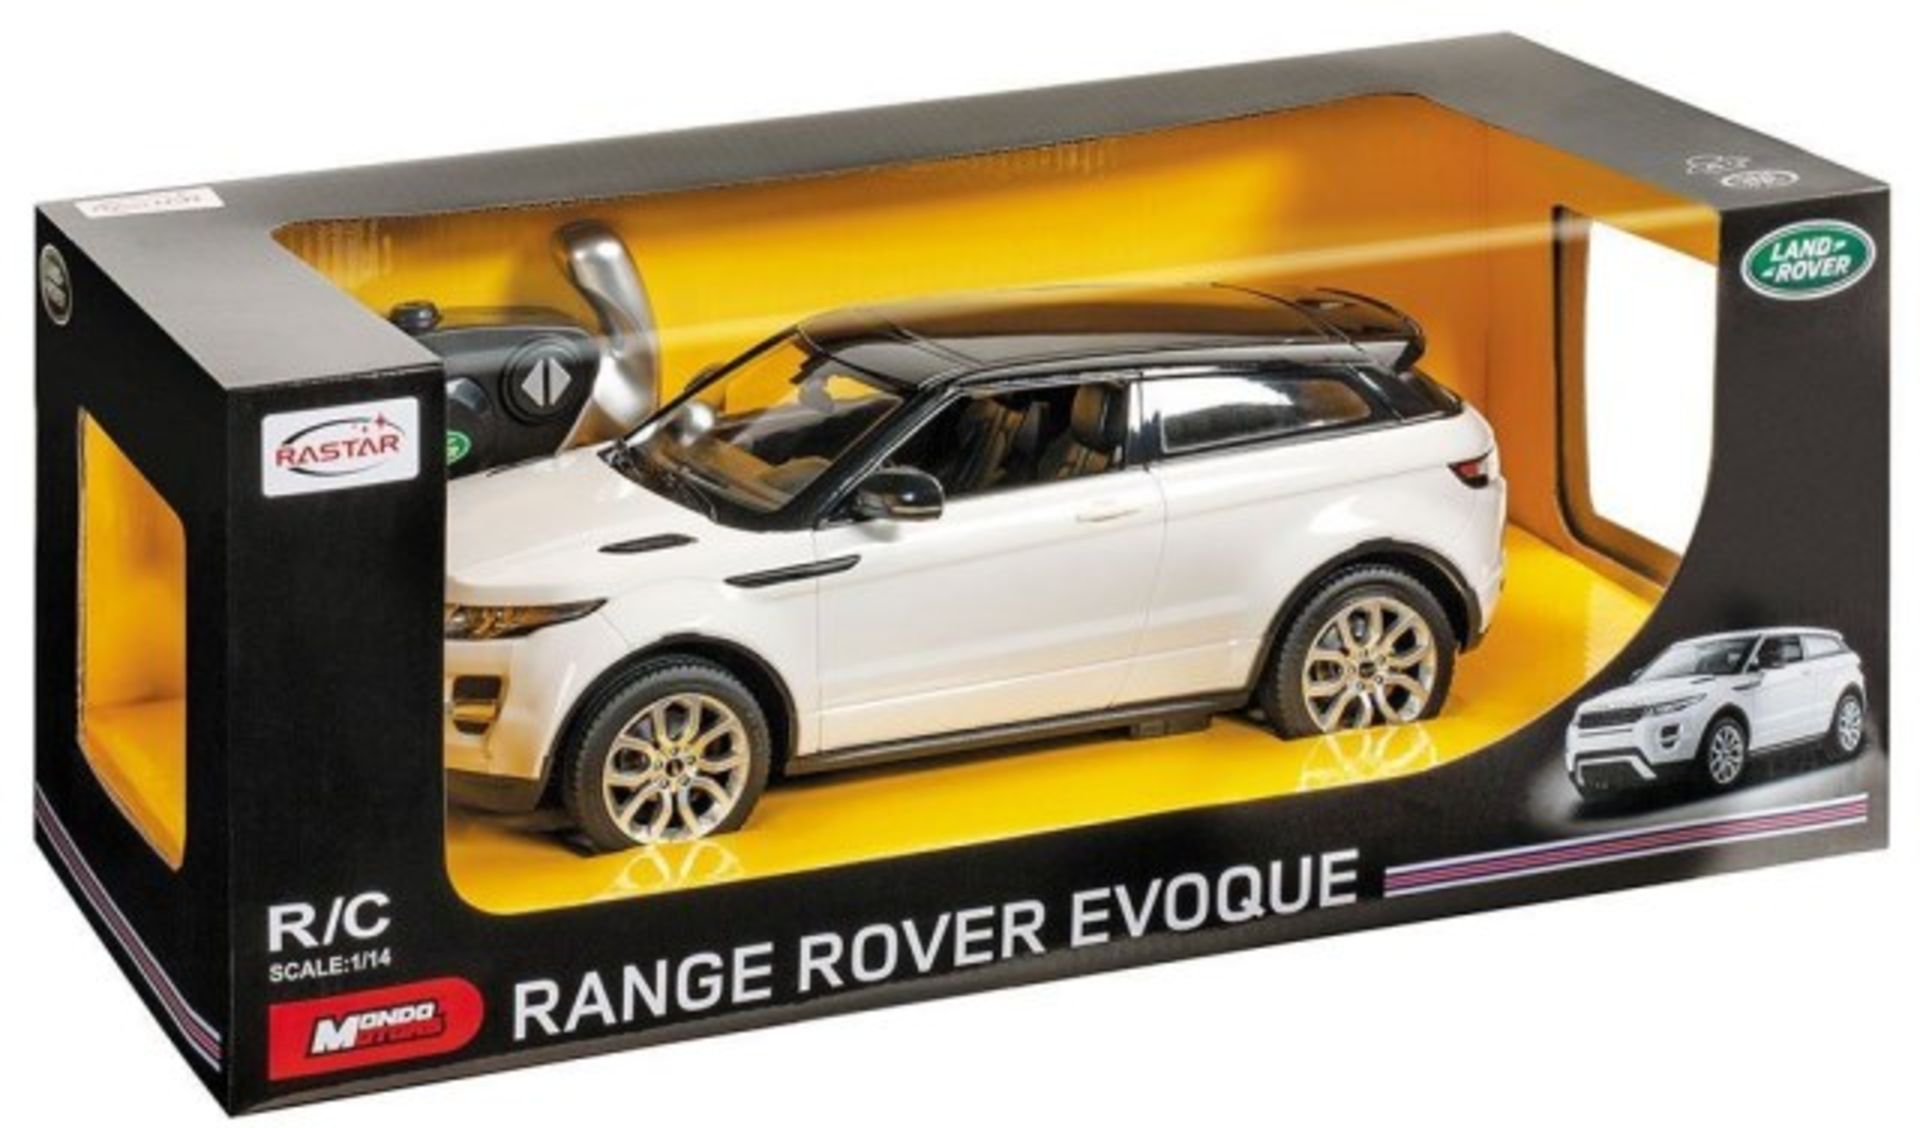 V *TRADE QTY* Brand New 1:14 Scale R/C Range Rover Evoque SRP49.99 Various Colours X 7 YOUR BID